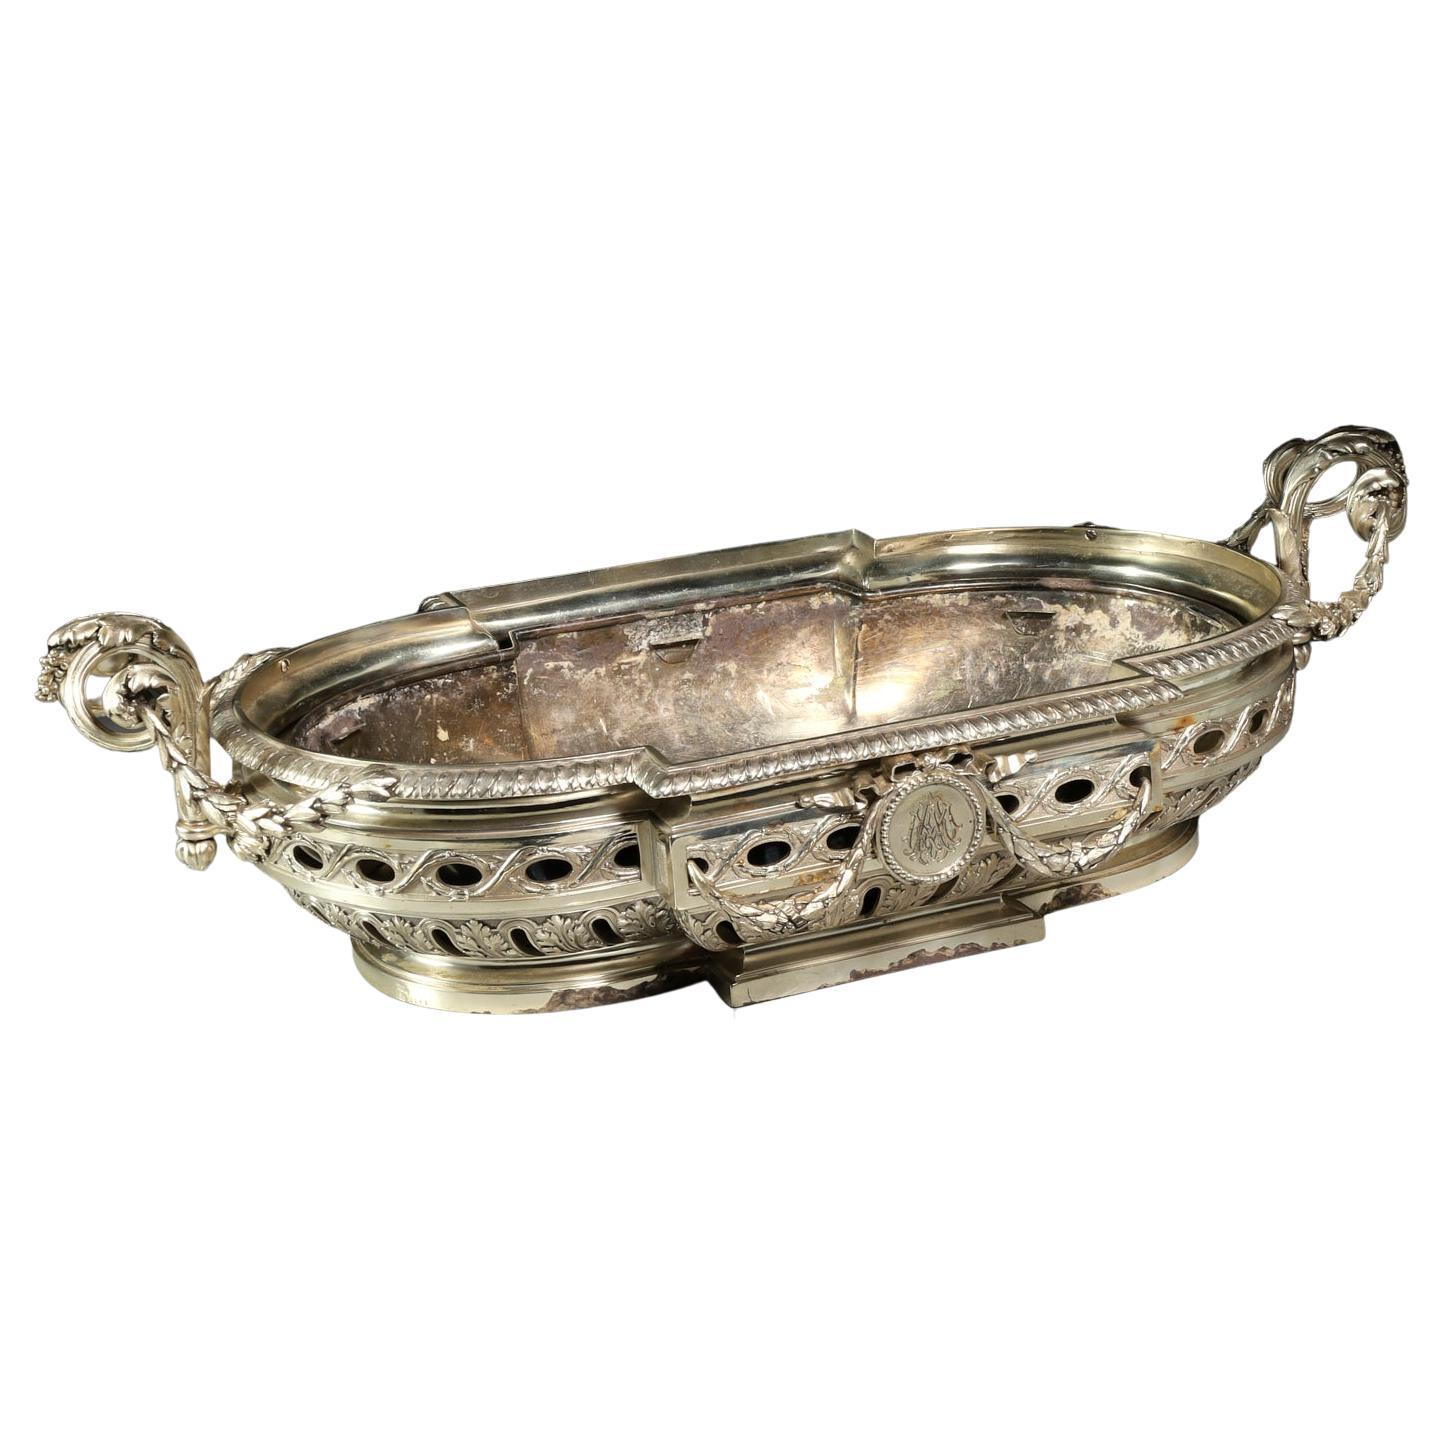 Massive Silverplated Centerpiece Jardenier from Maison Odiot Paris For Sale